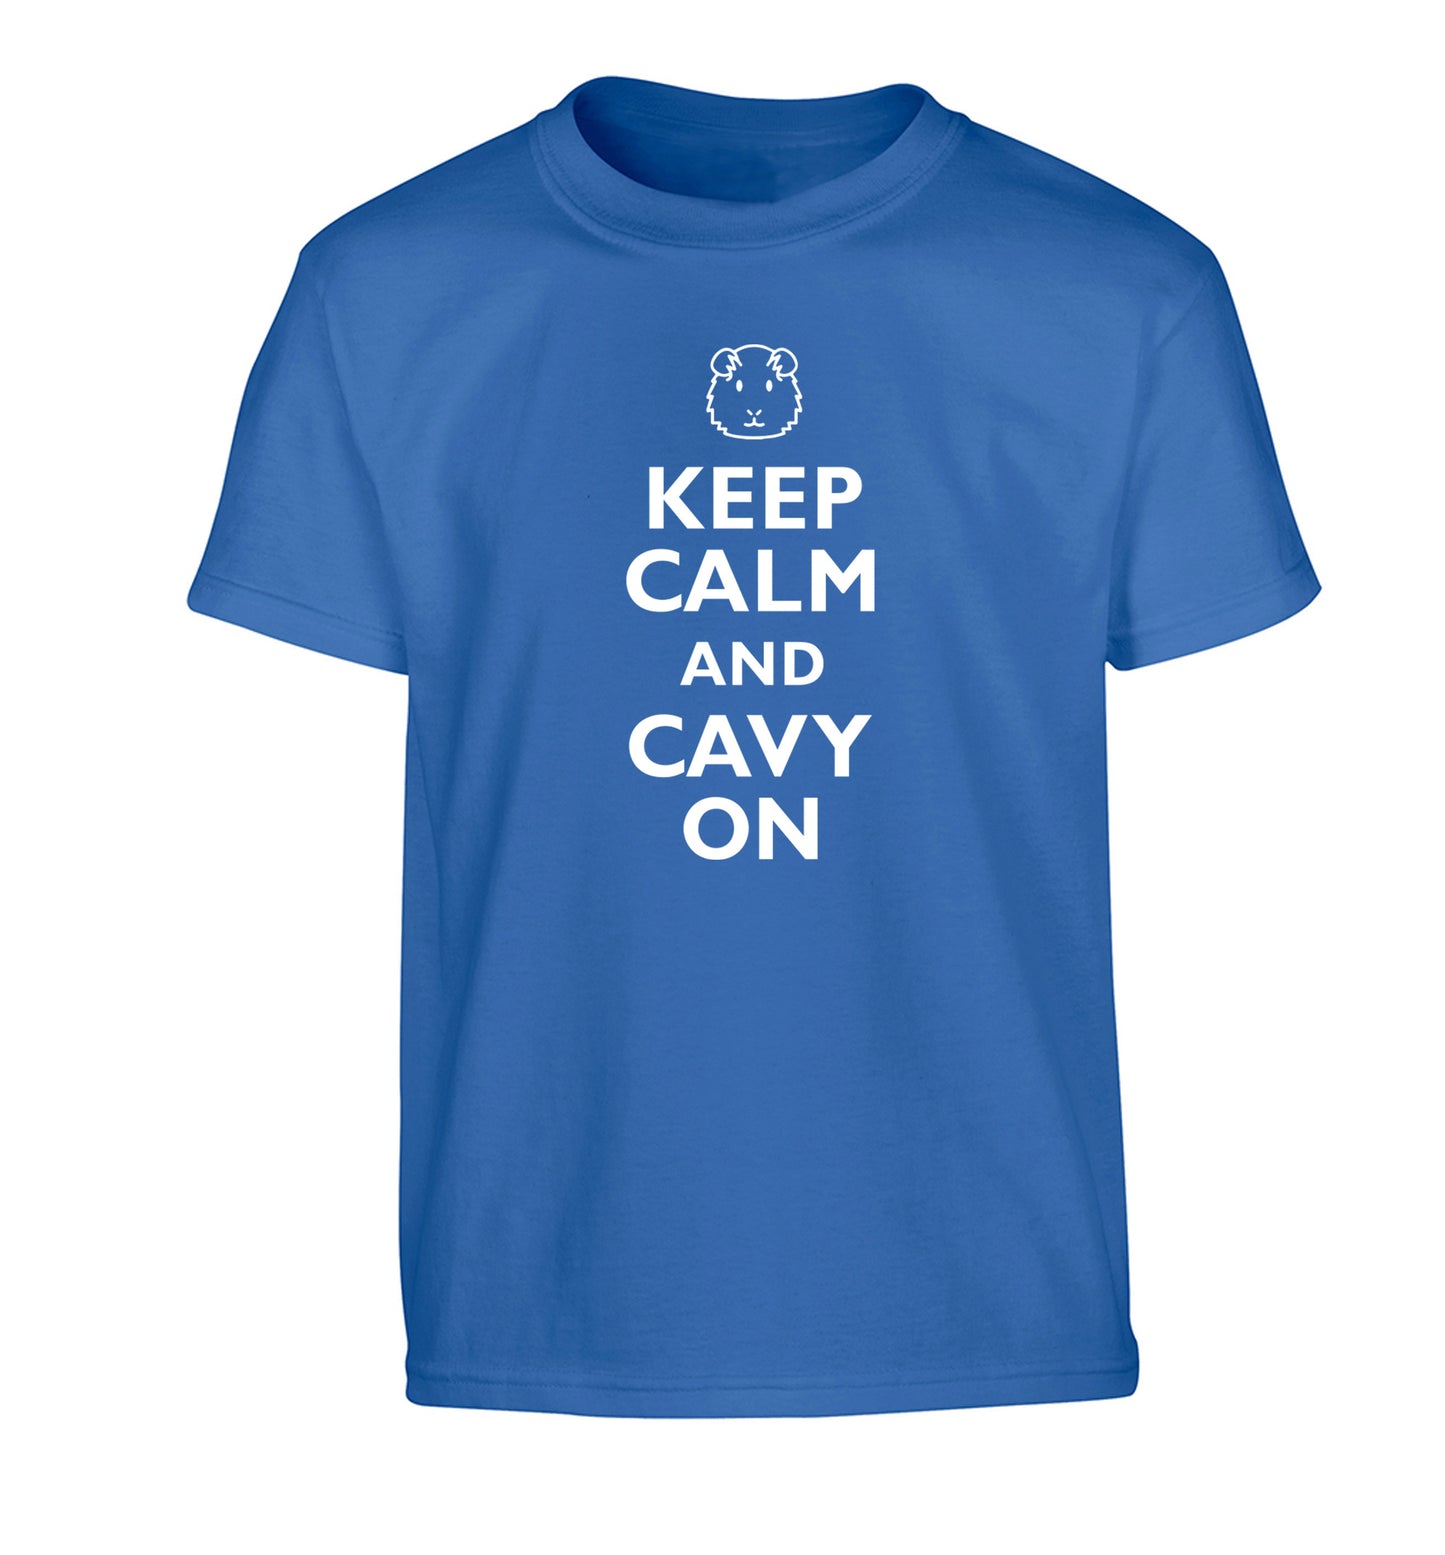 Keep calm and cavvy on Children's blue Tshirt 12-14 Years